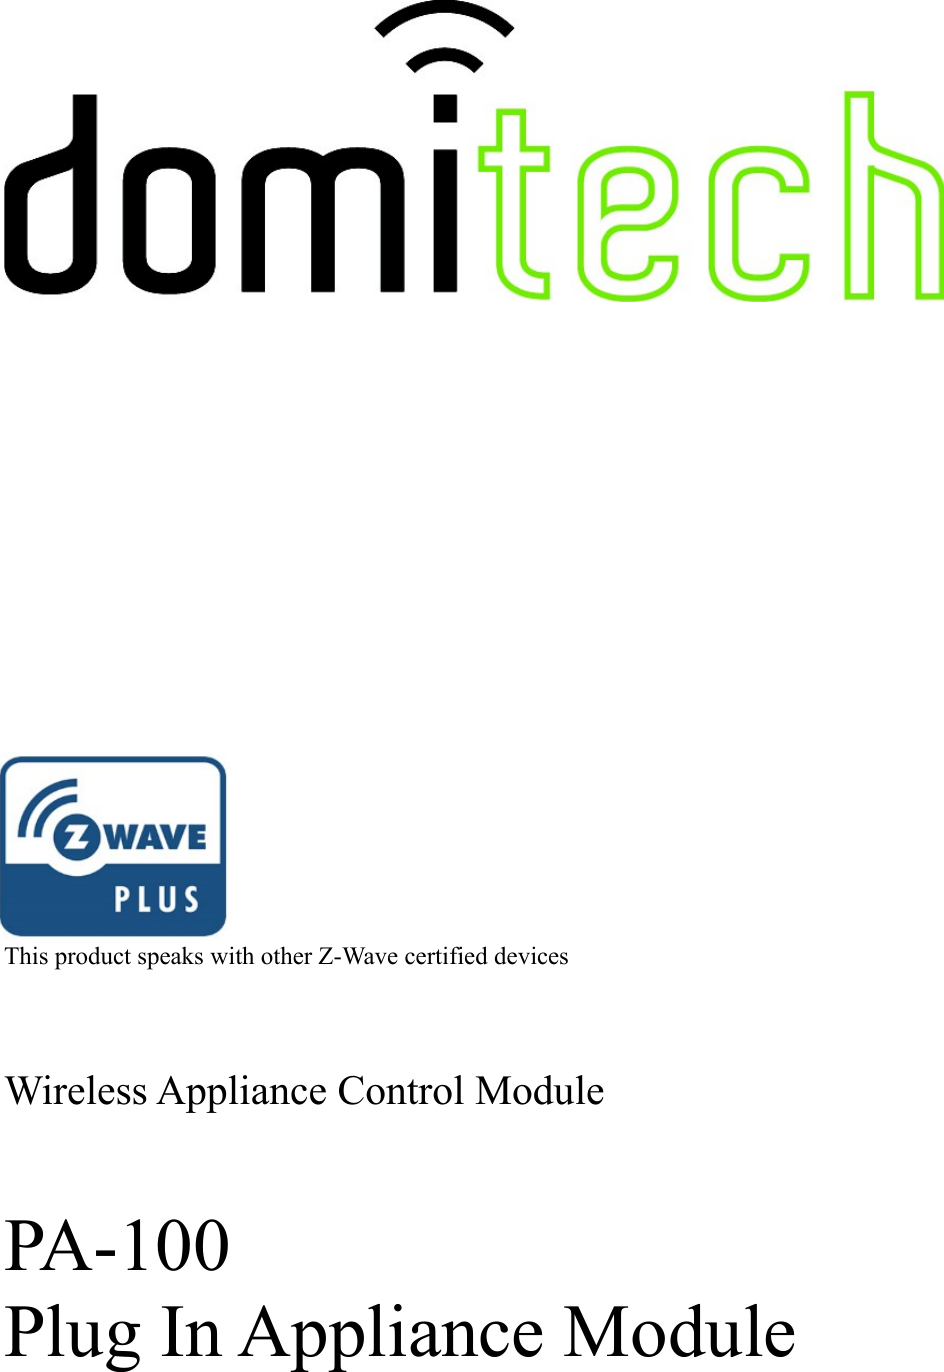                                       This product speaks with other Z-Wave certified devicesWireless Appliance Control ModulePA-100Plug In Appliance Module